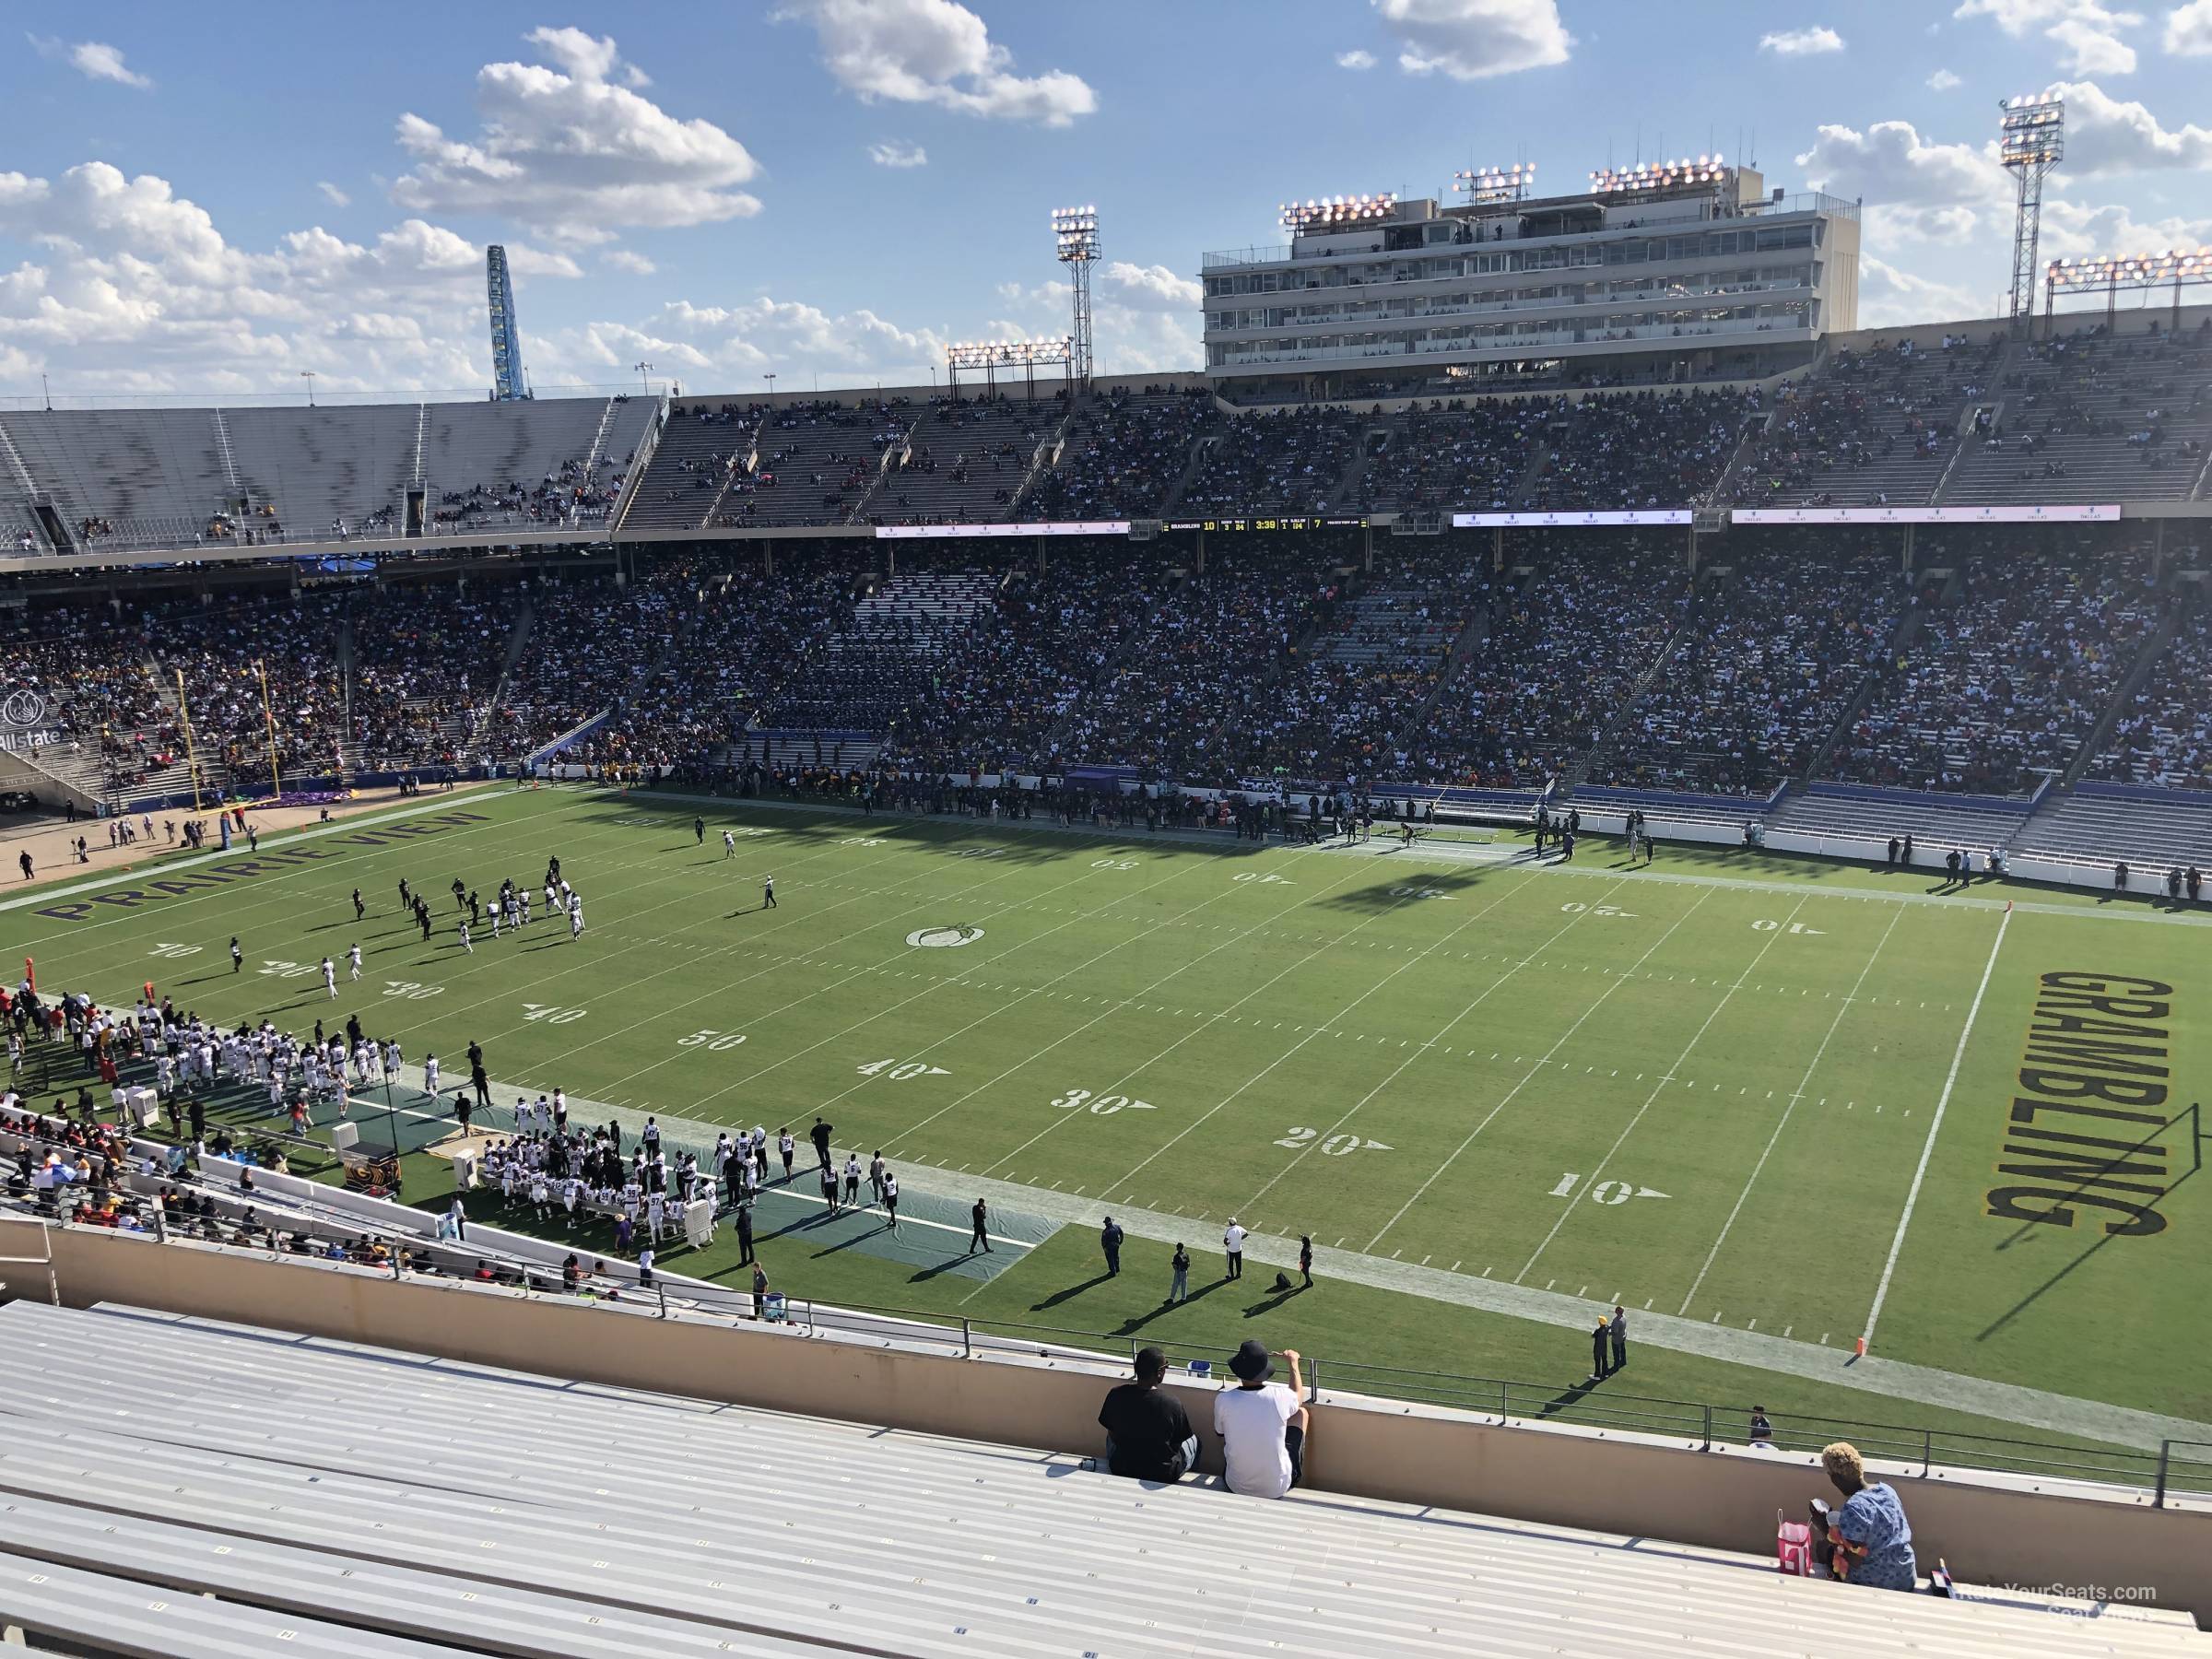 section 125, row 16 seat view  - cotton bowl